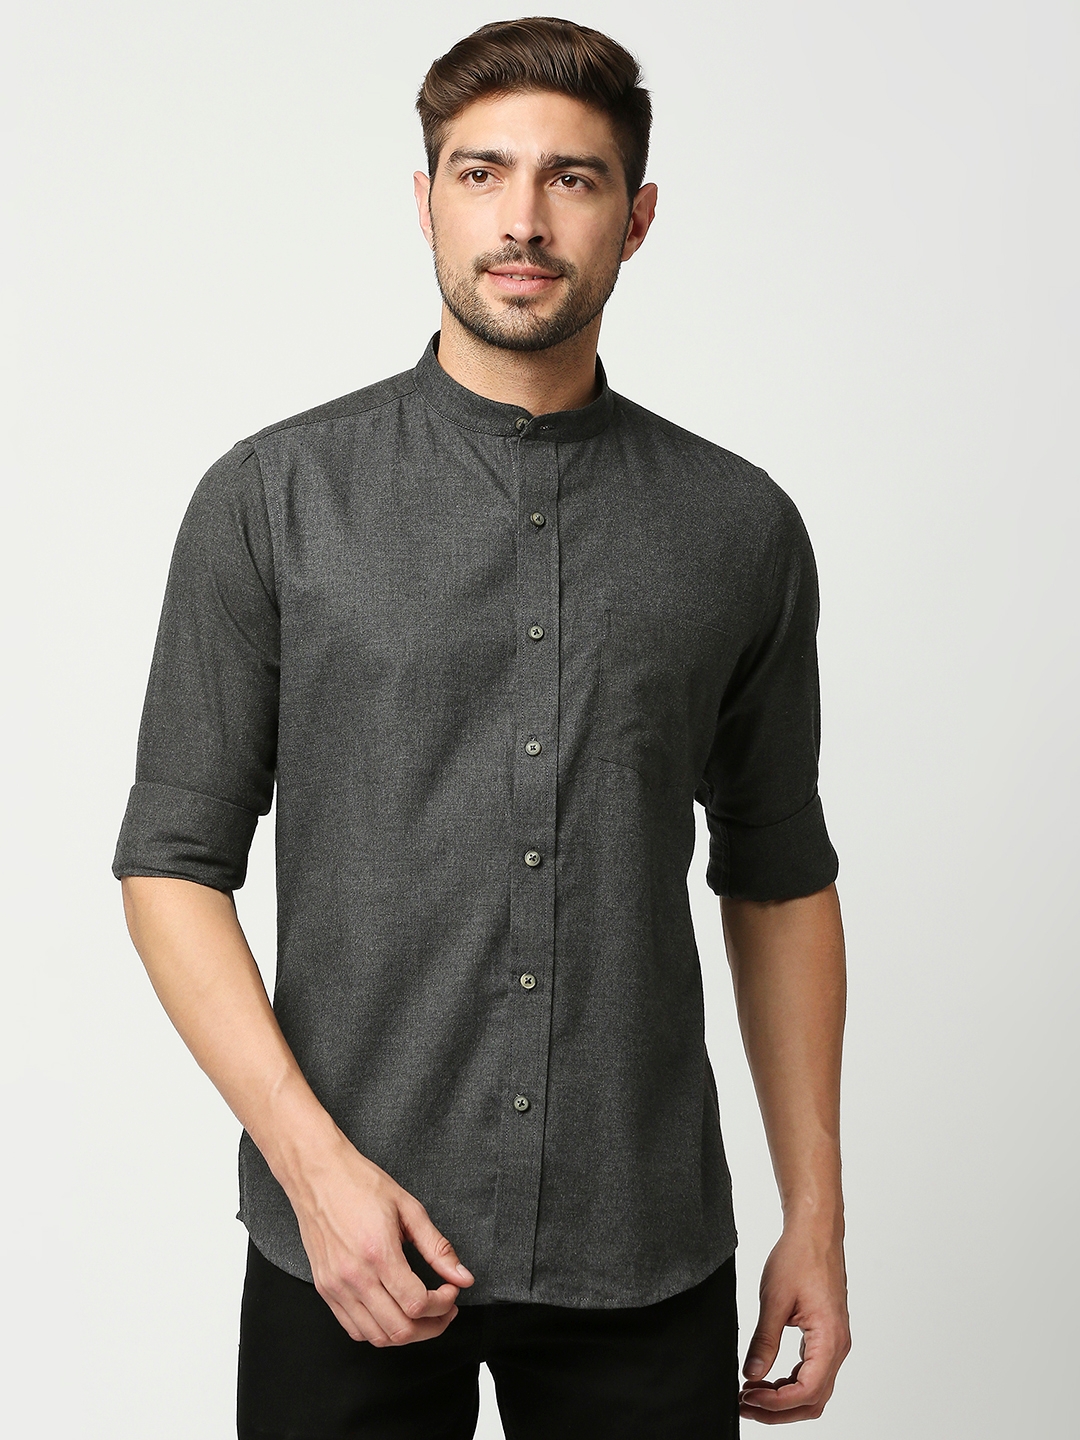 EVOQ | EVOQ's Charcoal Grey Flannel Full Sleeves Cotton Casual Shirt with Mandarin Collar for Men